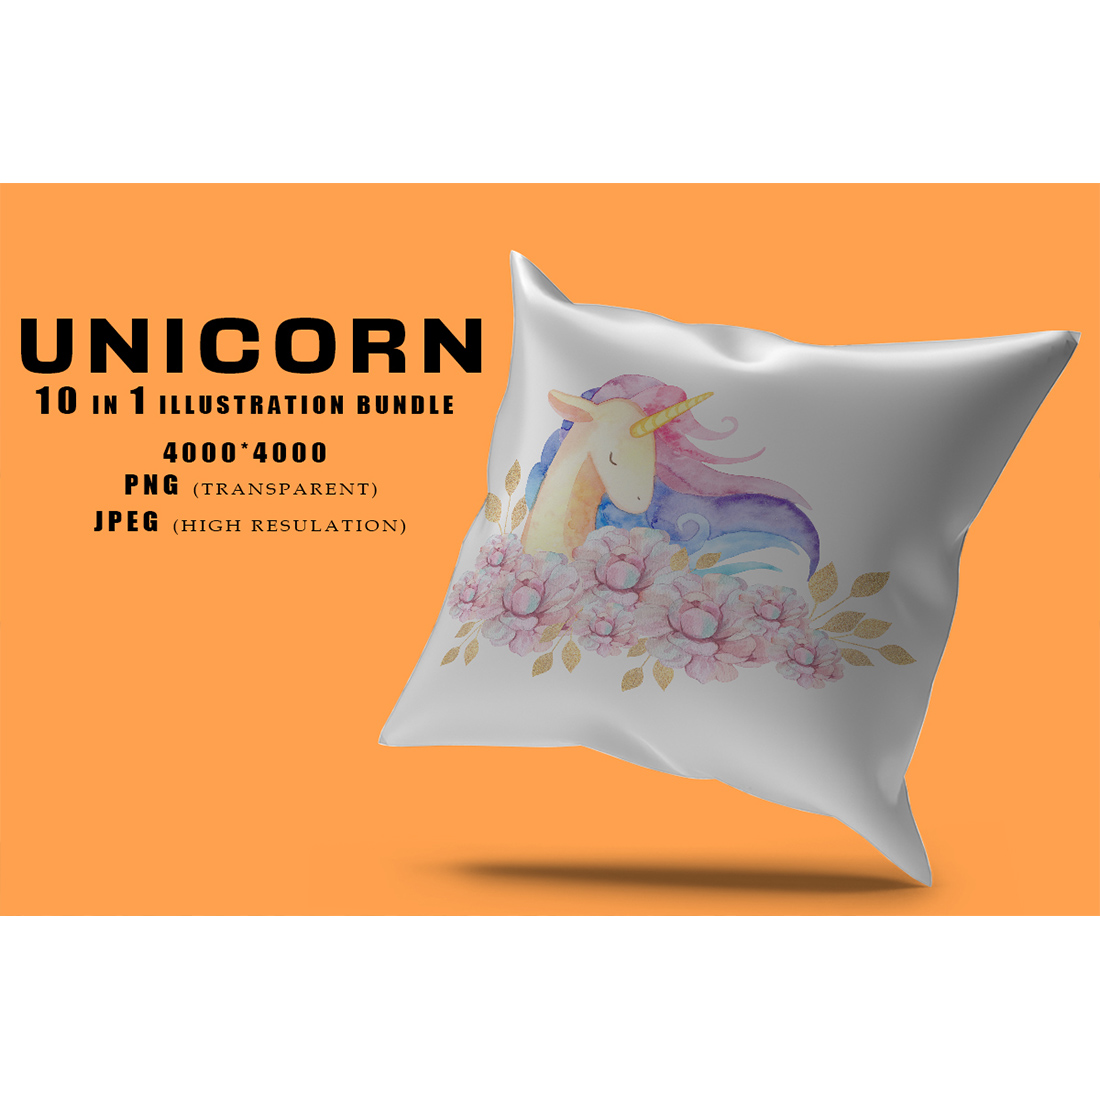 Pillow image with an irresistible unicorn print